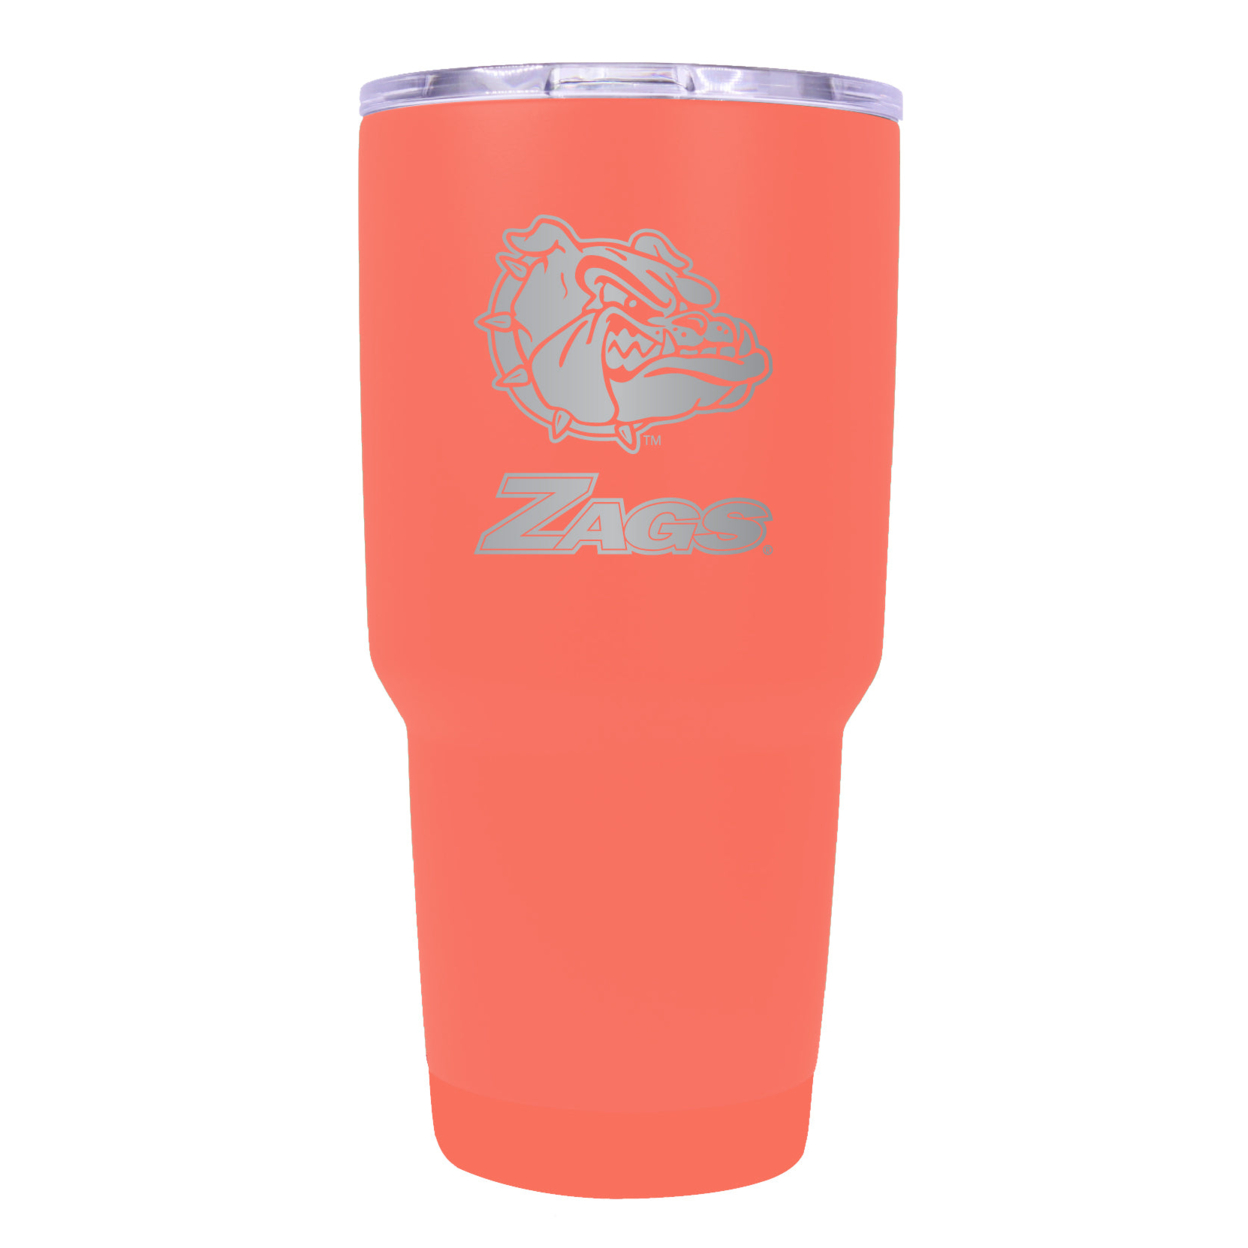 Gonzaga Bulldogs 24 Oz Insulated Tumbler Etched - Choose Your Color - Coral